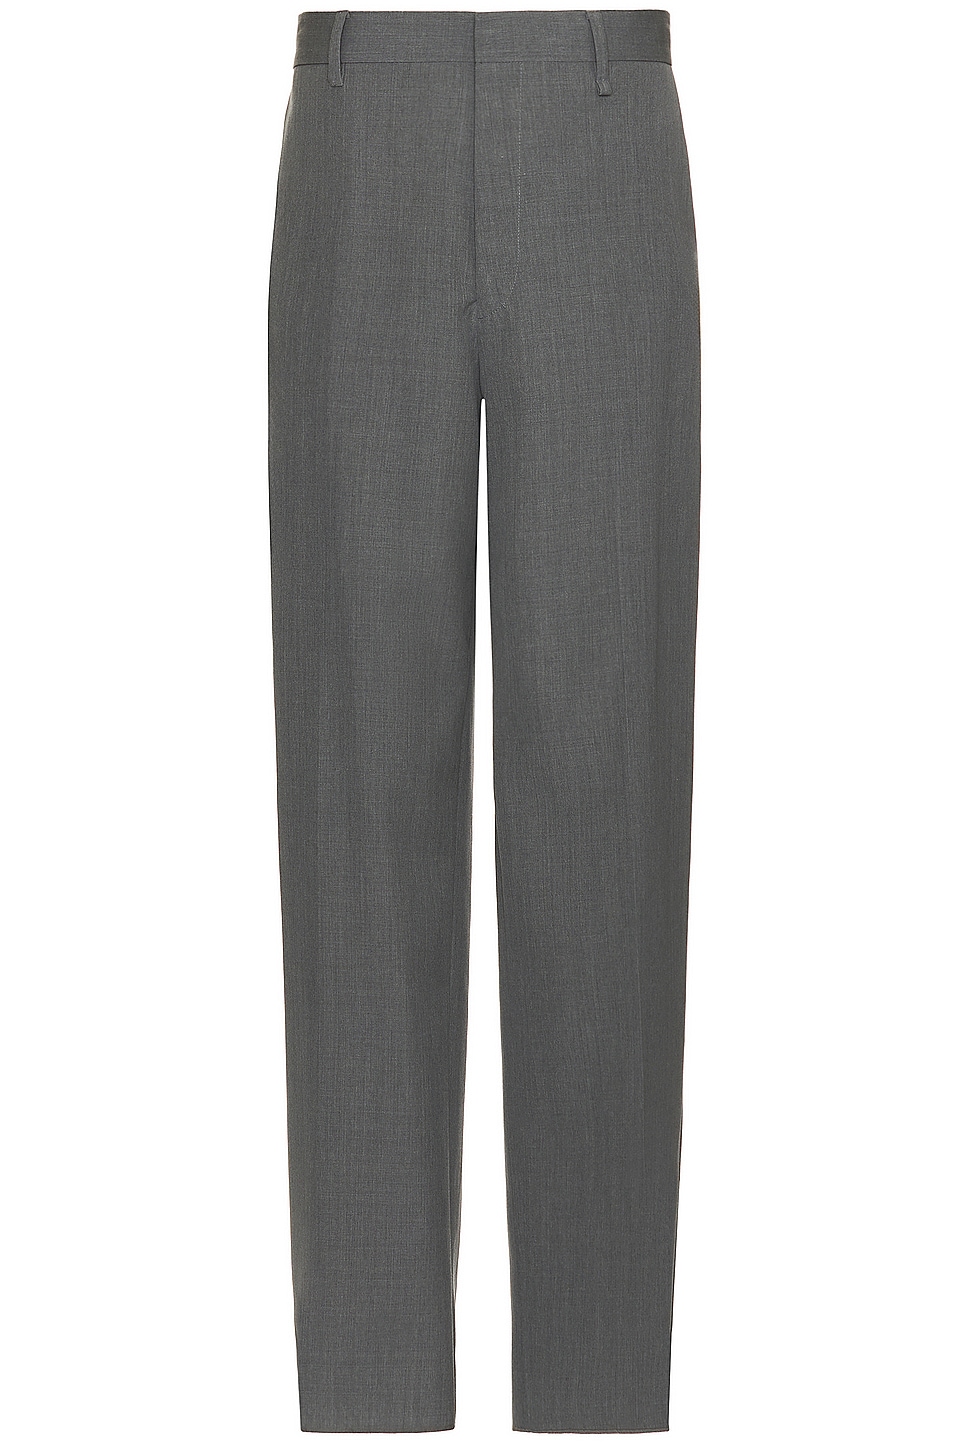 Image 1 of Givenchy Extra Wide Leg Trouser in Medium Grey